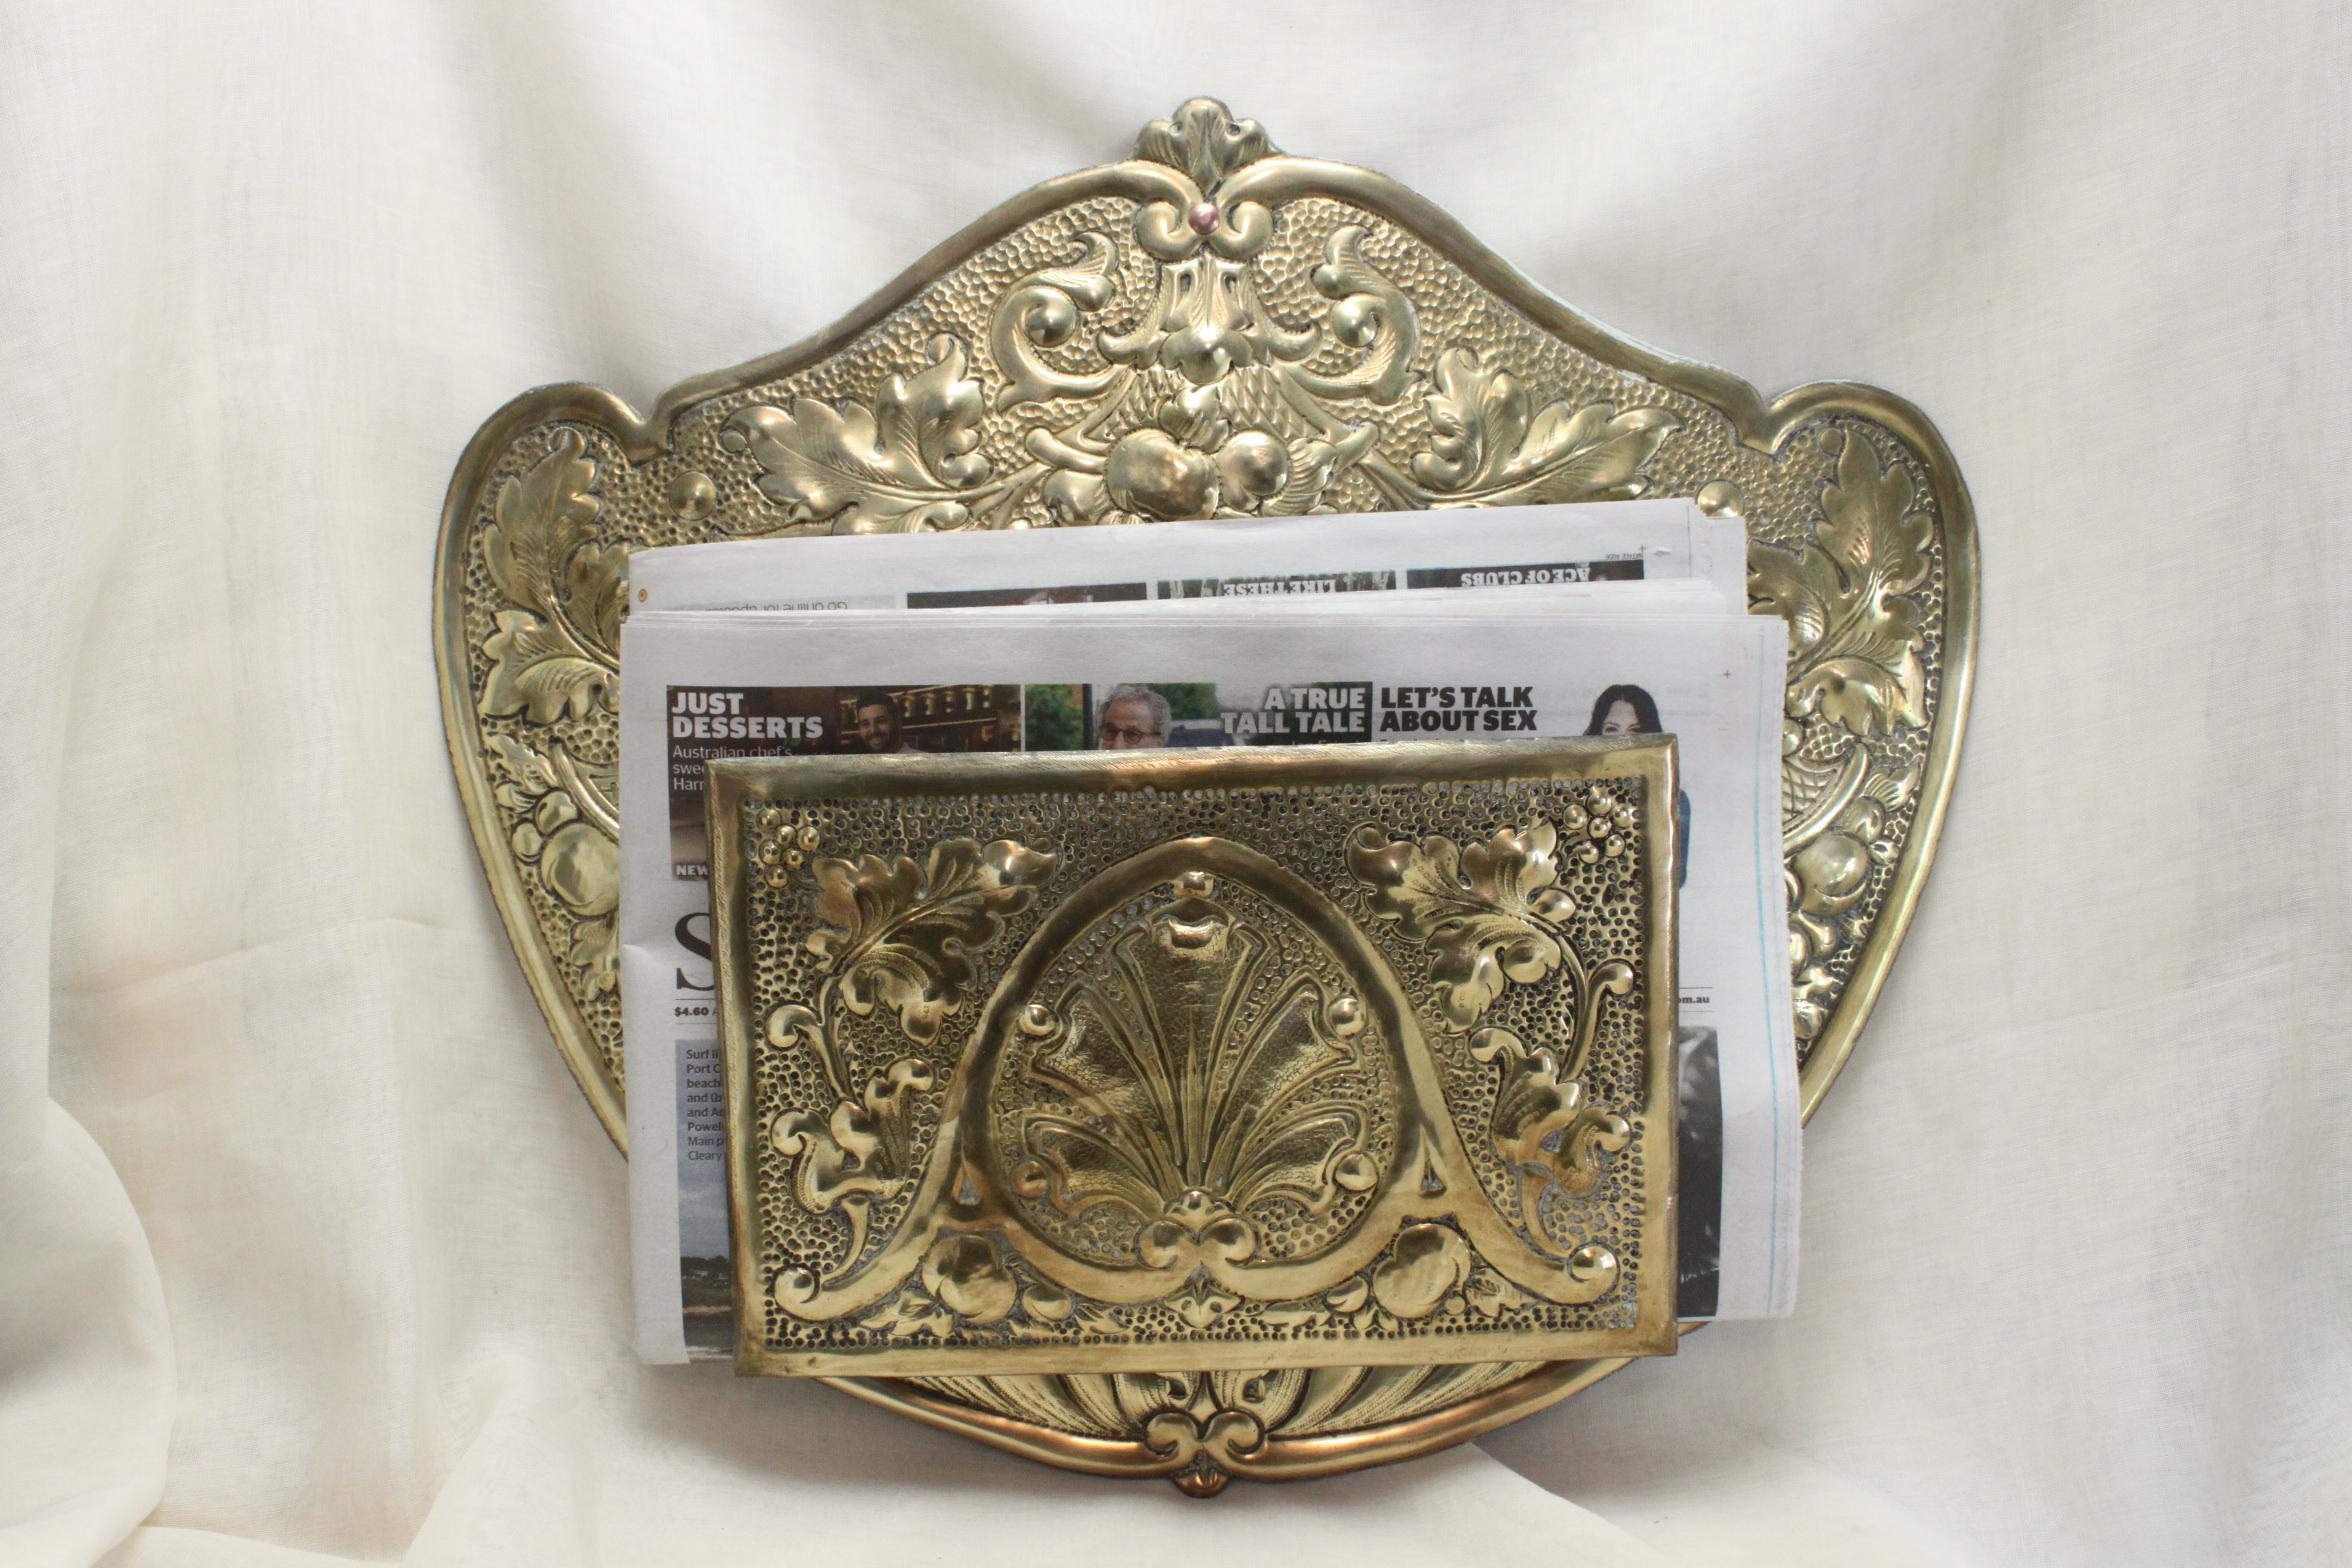 This eye catching pressed brass newspaper rack would have hung on a wall as a receptacle for newspapers or magazines. It hangs from a central ring to the rear. It could be used today for its original purpose and left just as it is as wall decor, or